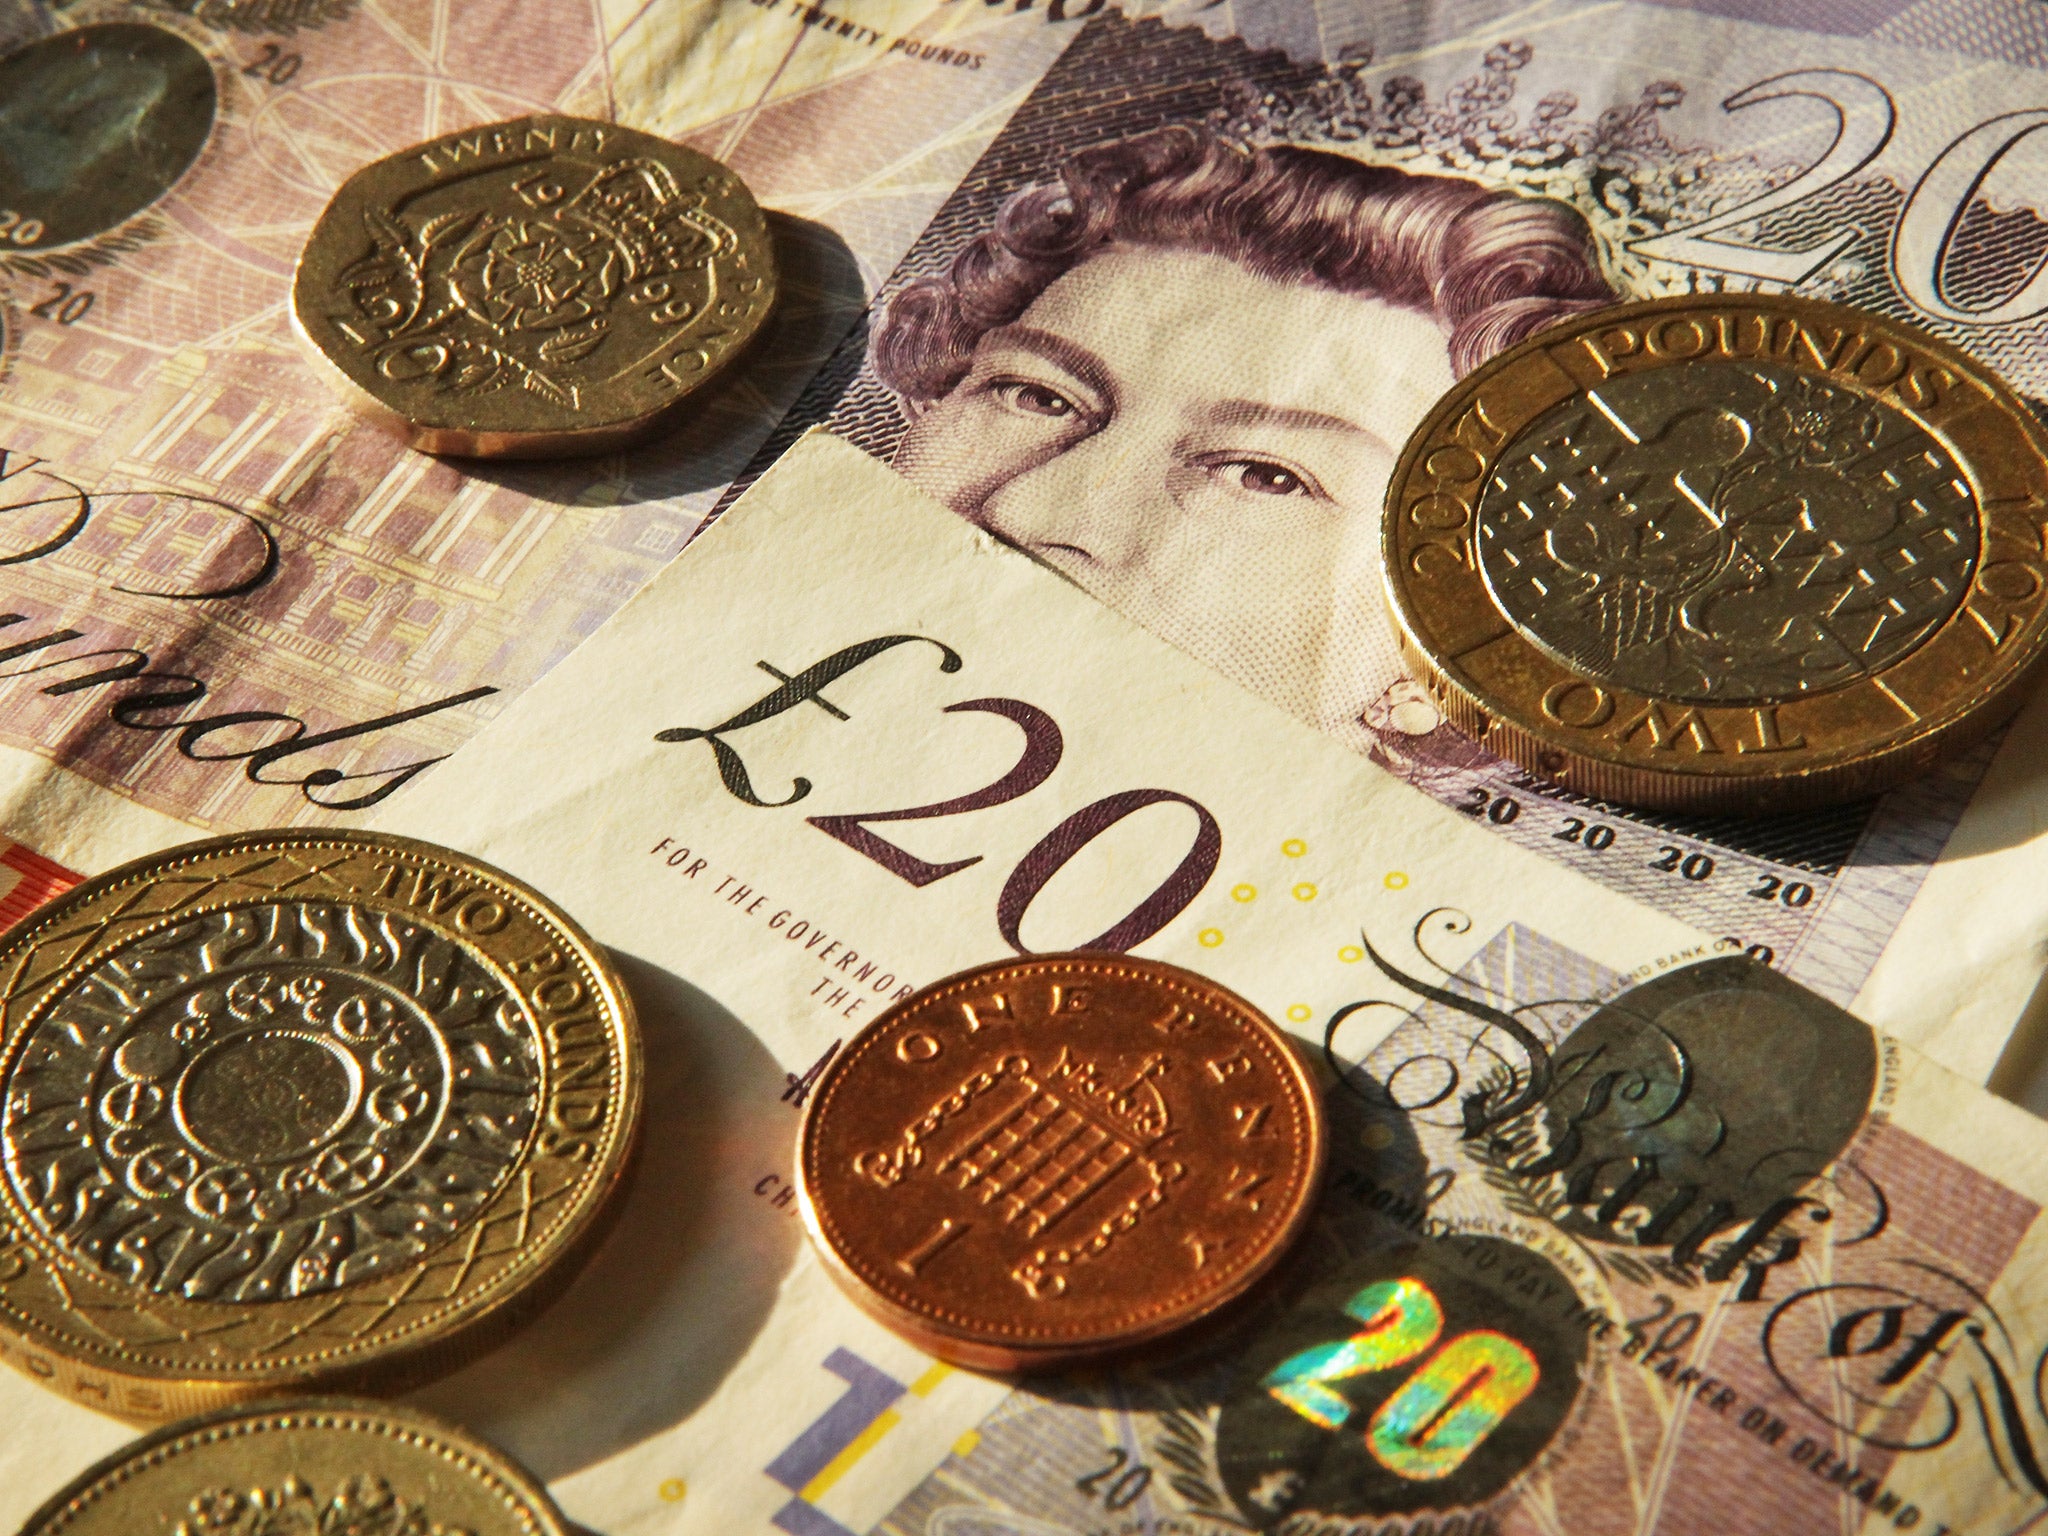 The government has increased the minimum wage sharply since April 2016, raising it from £6.70 to £8.21 today